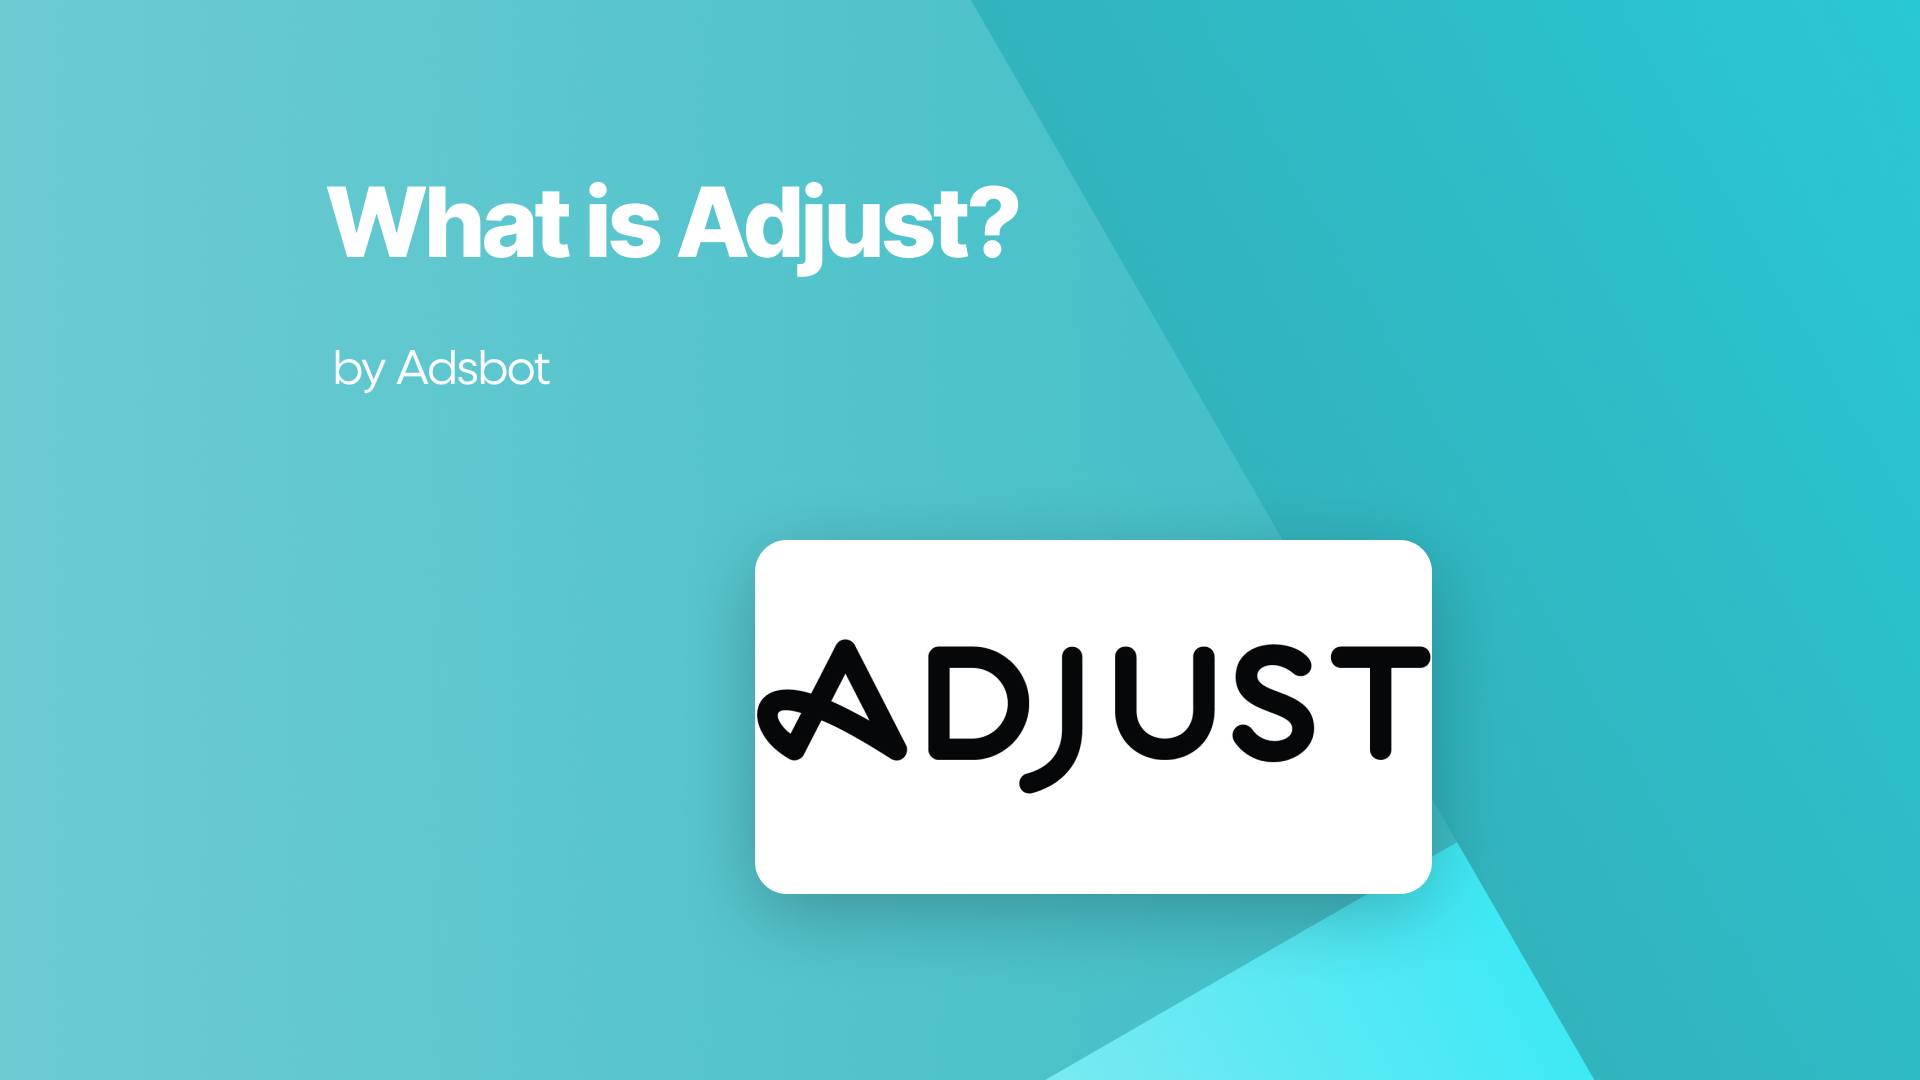 What is Adjust?